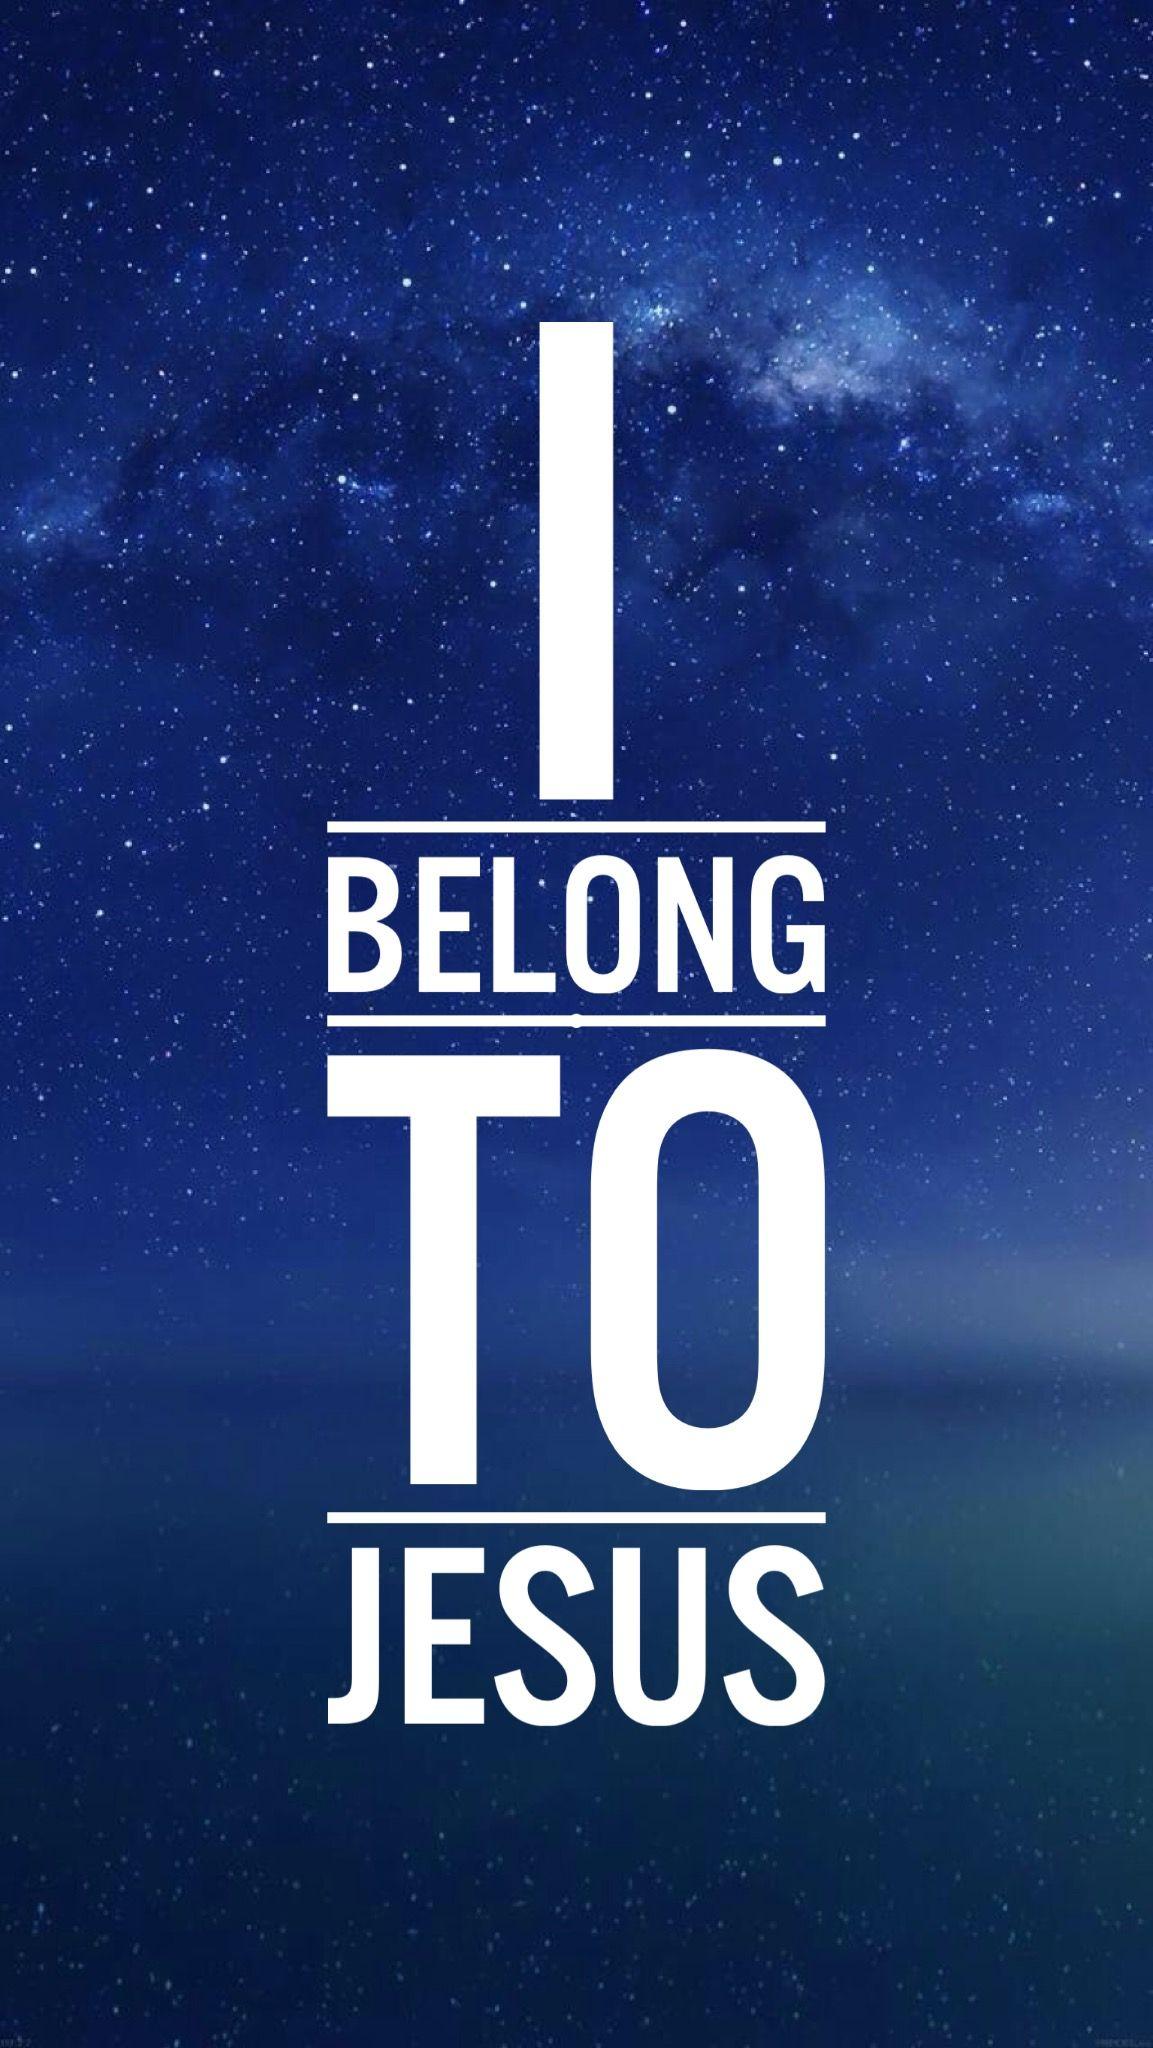 I Belong to Jesus!. Christian quotes about life, Jesus